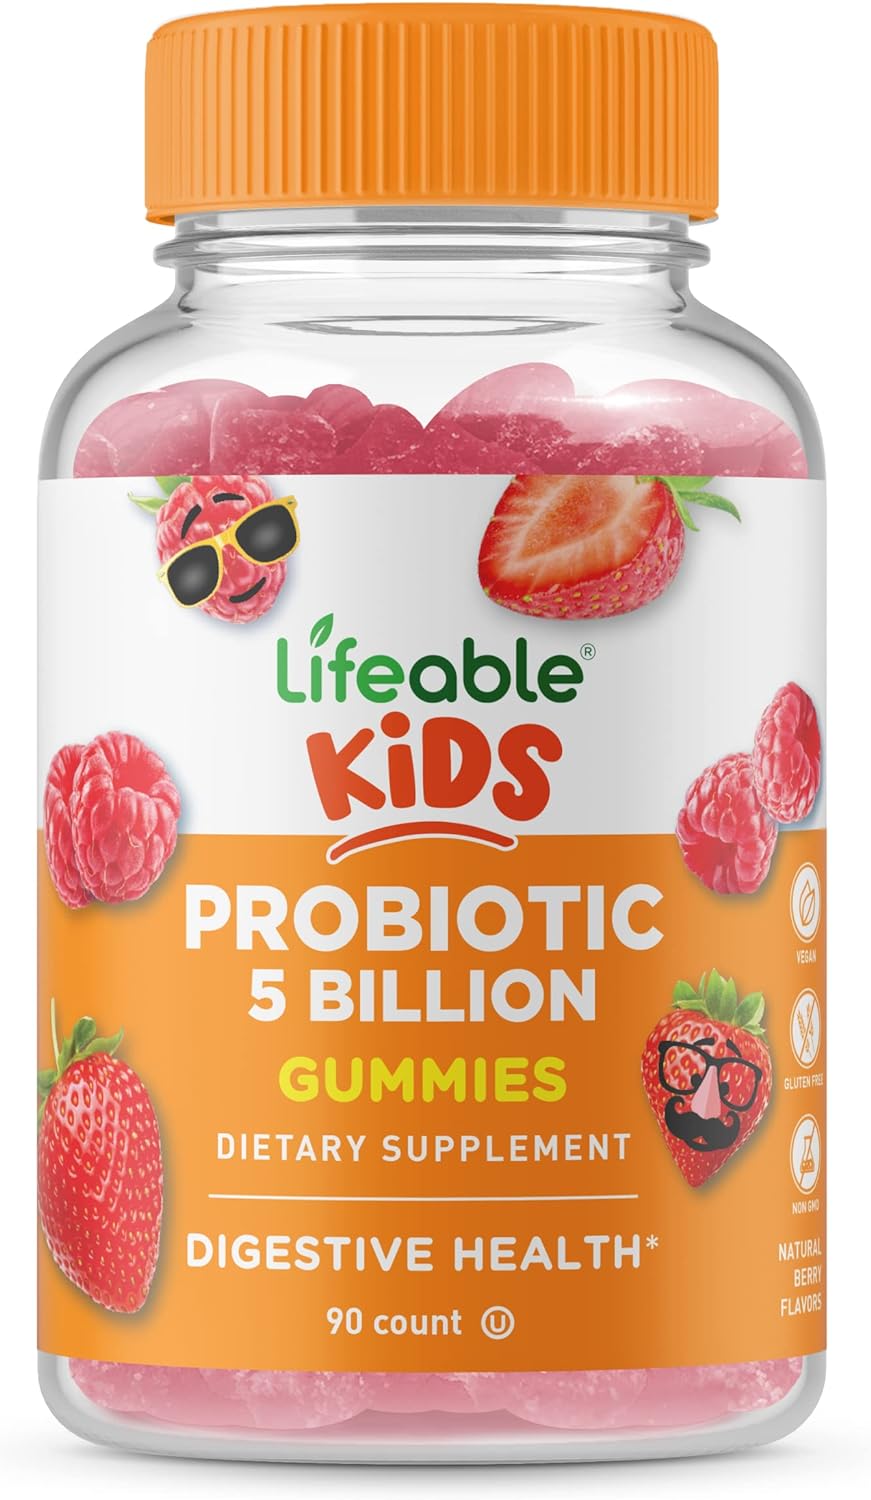 Lifeable Probiotics for Kids - 50 mg (5 Billion) - Great Tasting Natural Flavor Gummy Supplement - Gluten Free Vegetarian GMO-Free Probiotic Chewable - for Gut Health and Immune Support - 90 Gummies